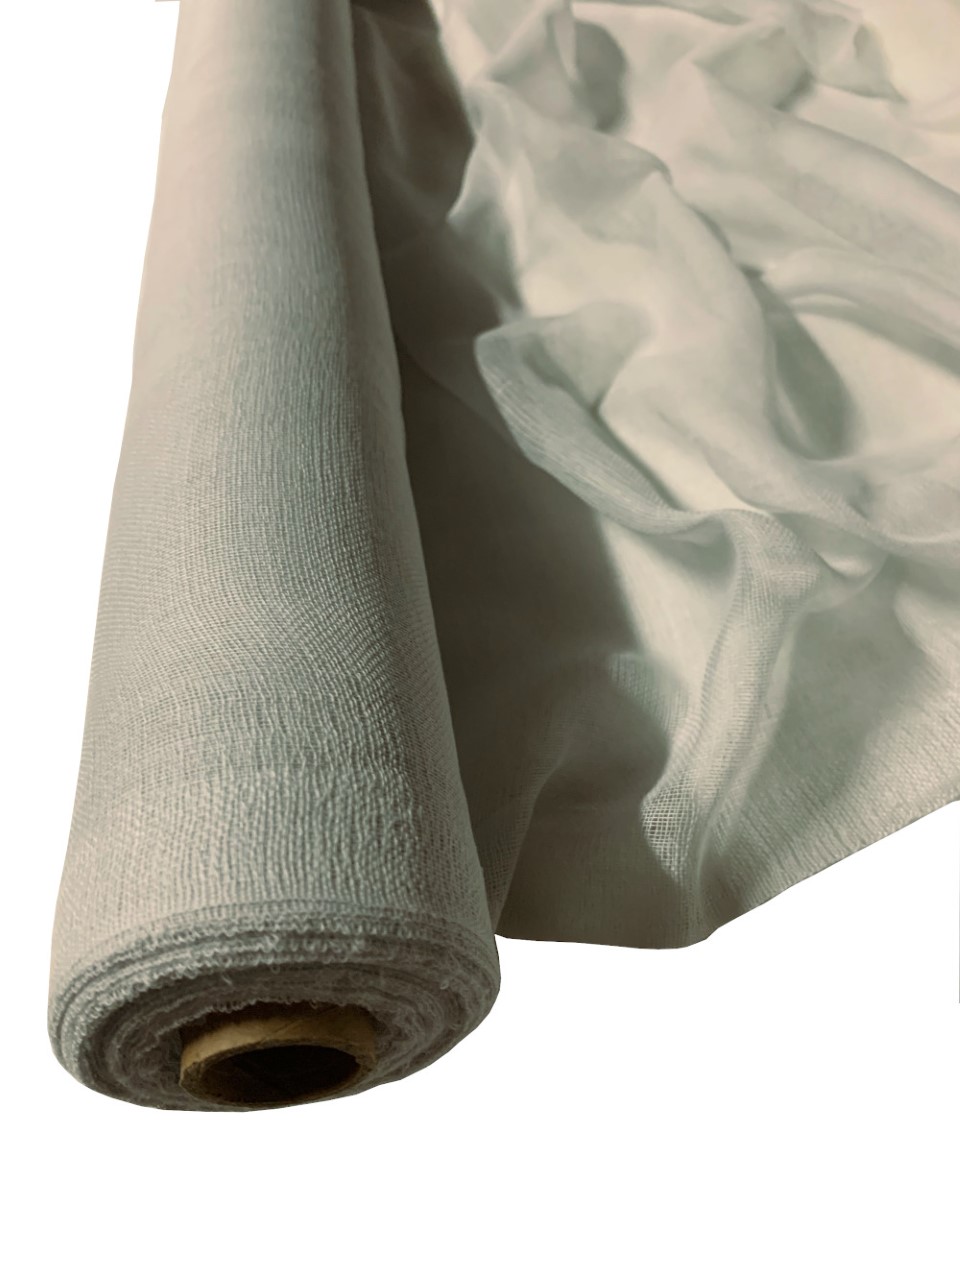 36" Wide Light Grey Cheesecloth By The Yard - 100% Cotton